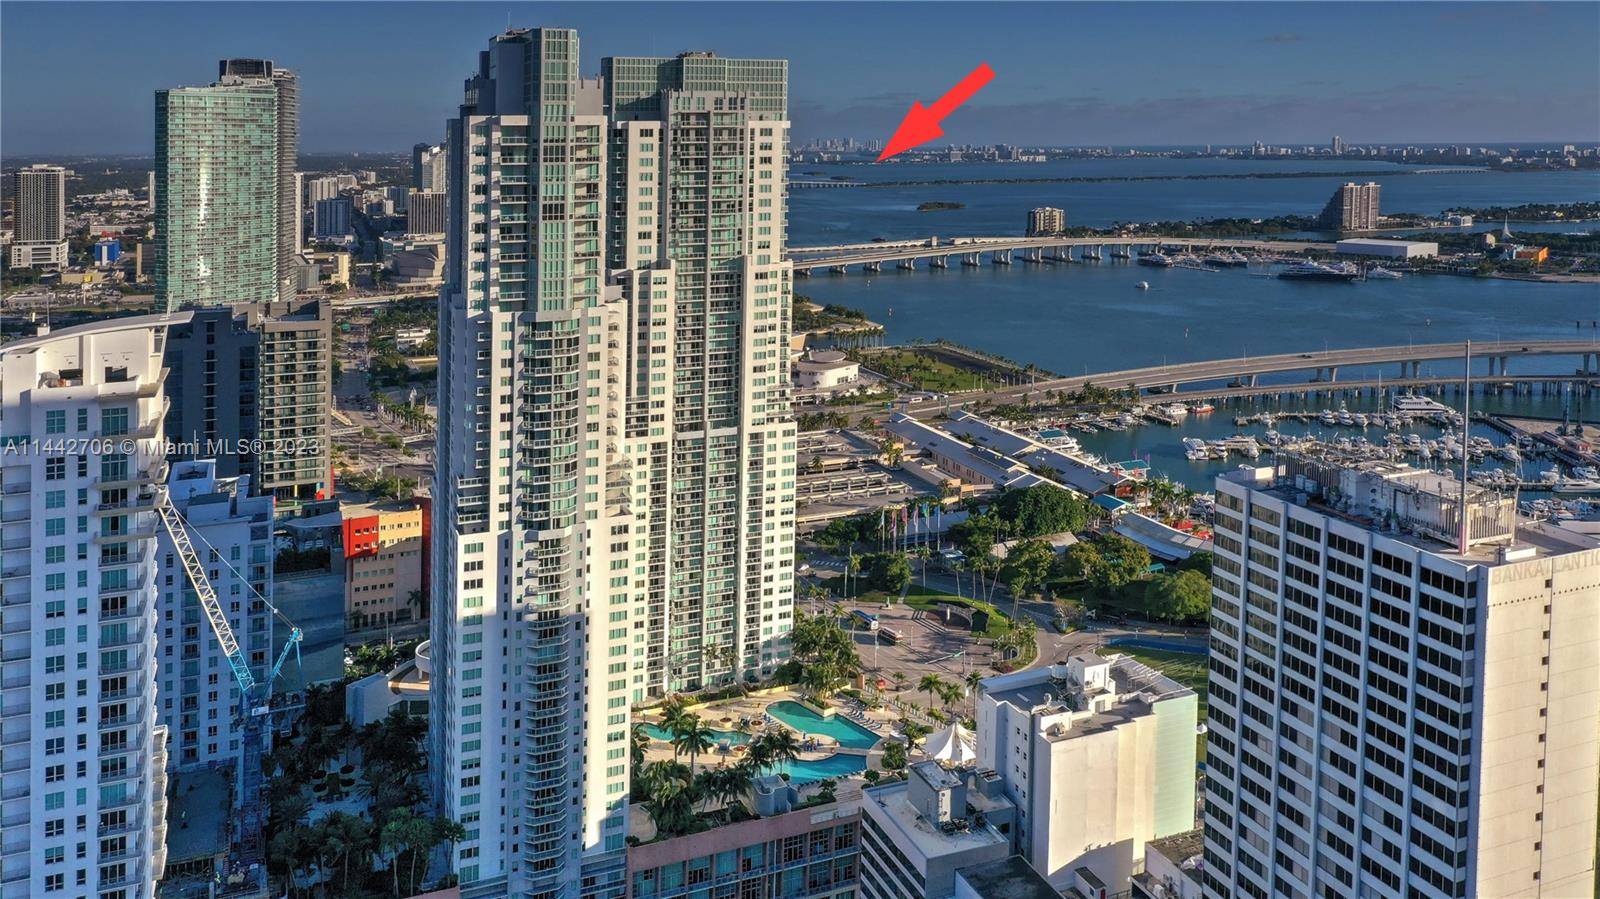 Experience sophisticated urban living at the Vizcayne Condo Residence in the heart of Downtown Miami.